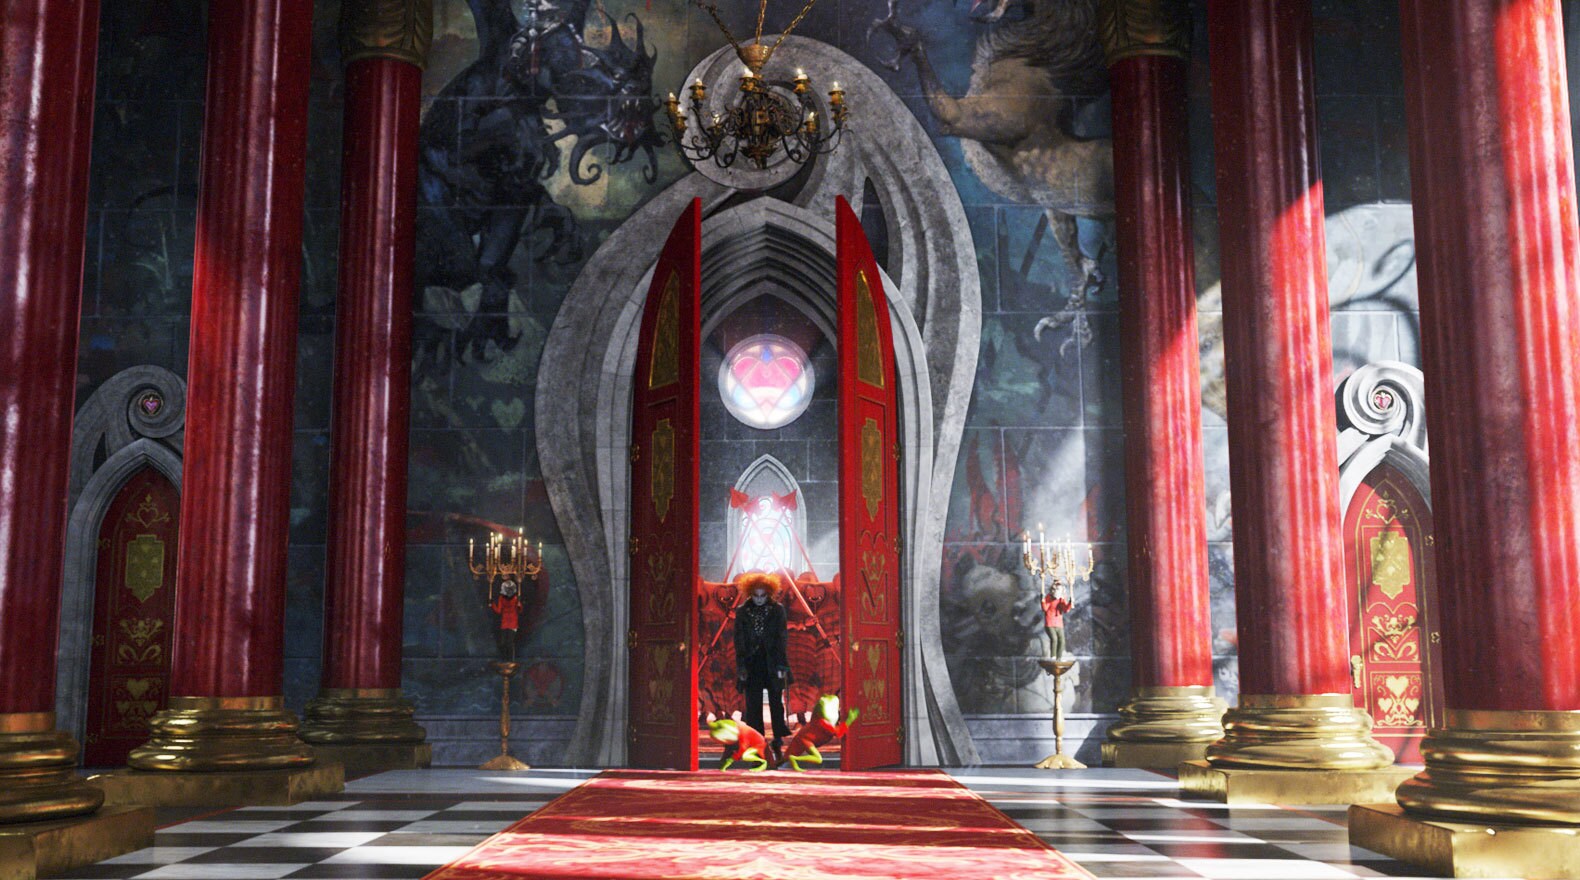 The Red Queen's Throne Room